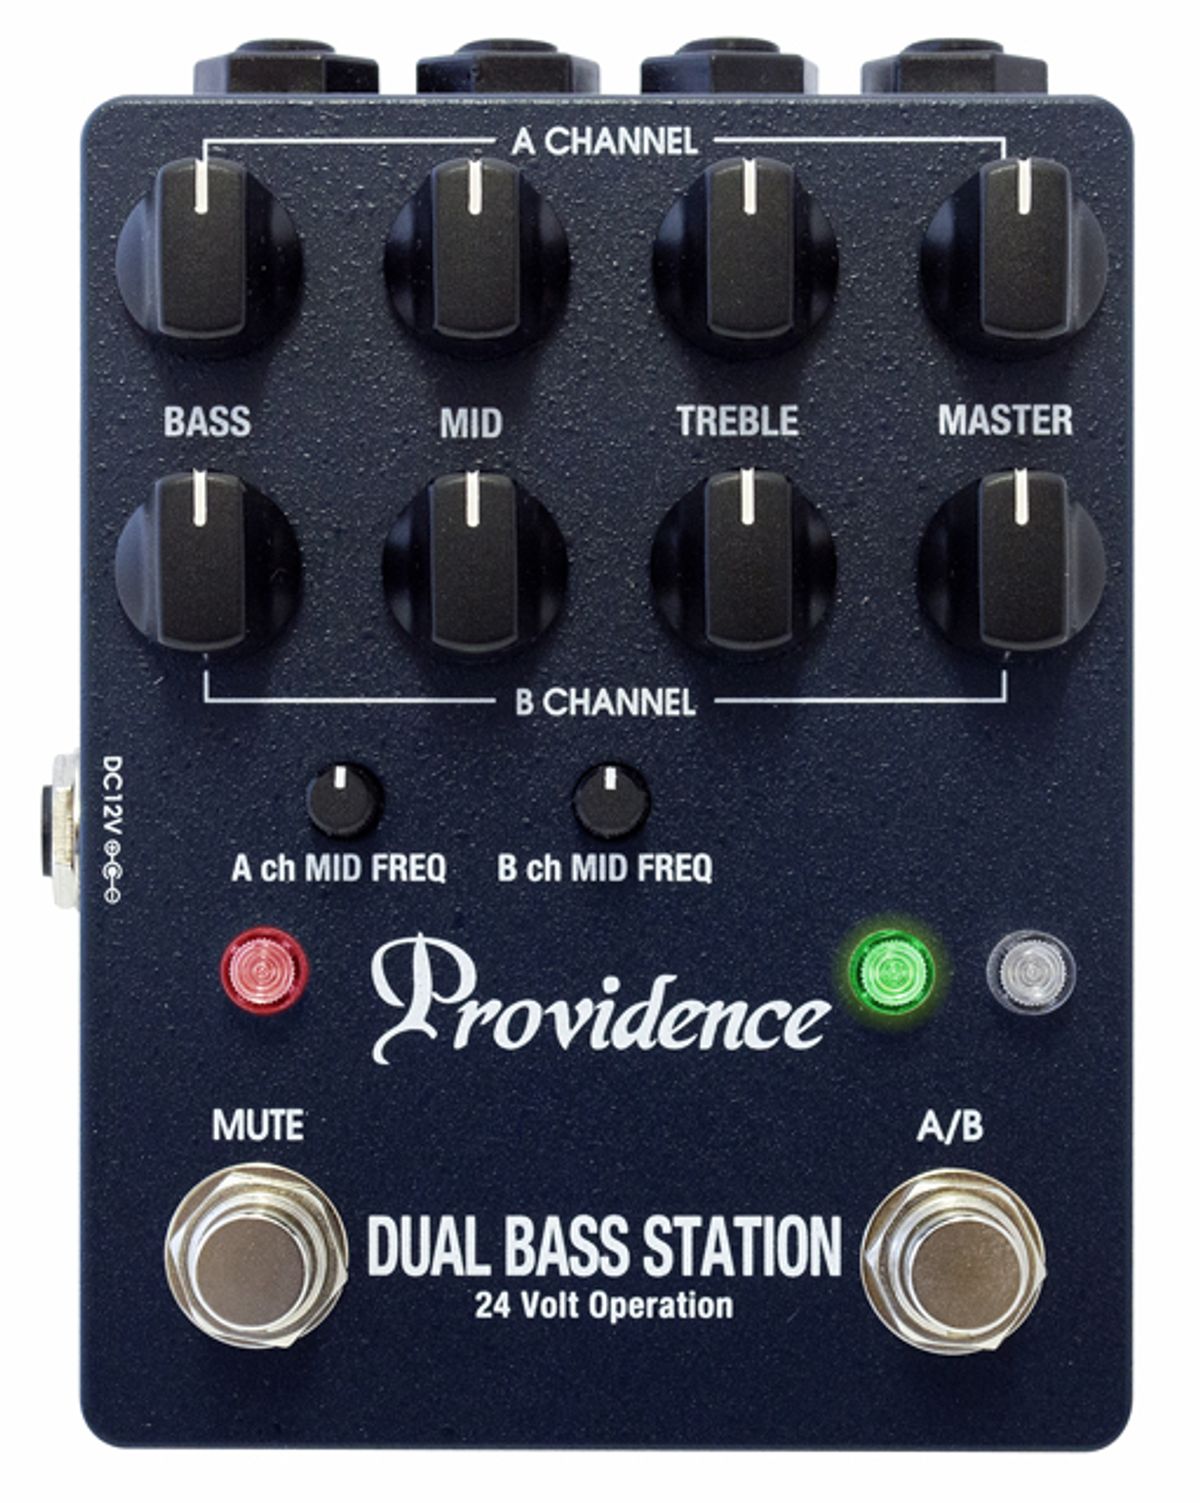 Providence Introduces the Dual Bass Station Preamp